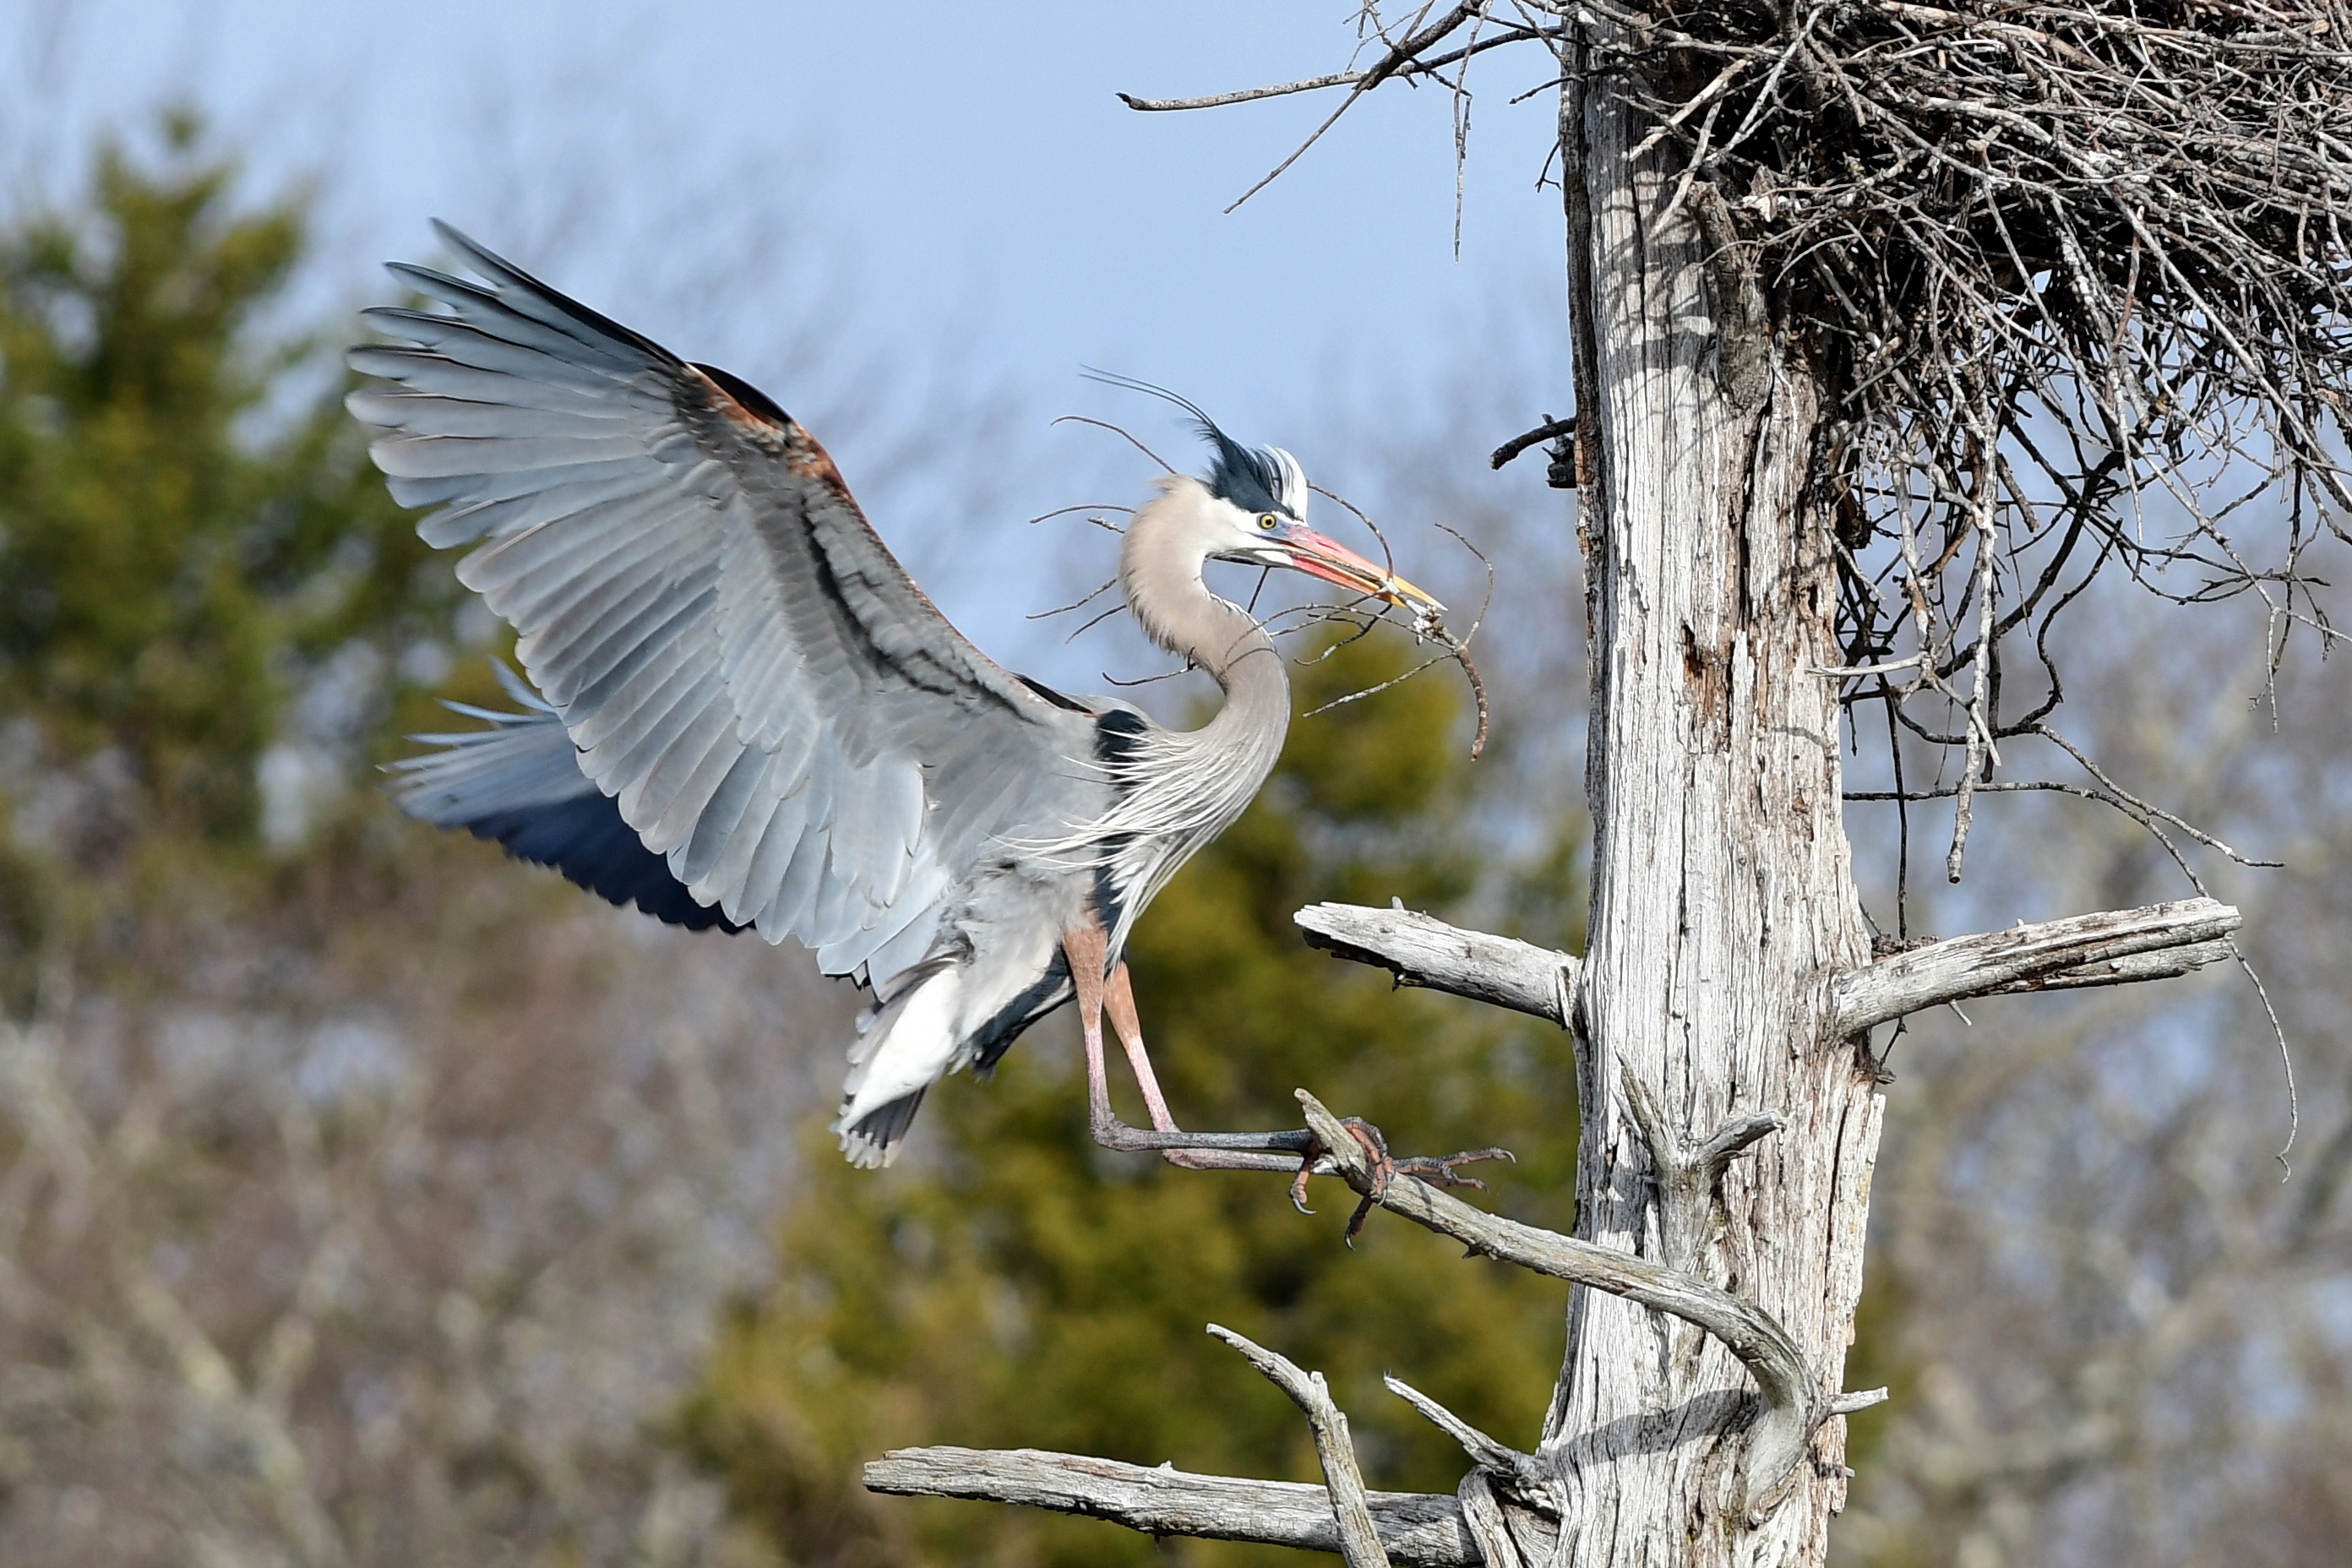 Great blue heron landing on tree branch with stick in its bill.